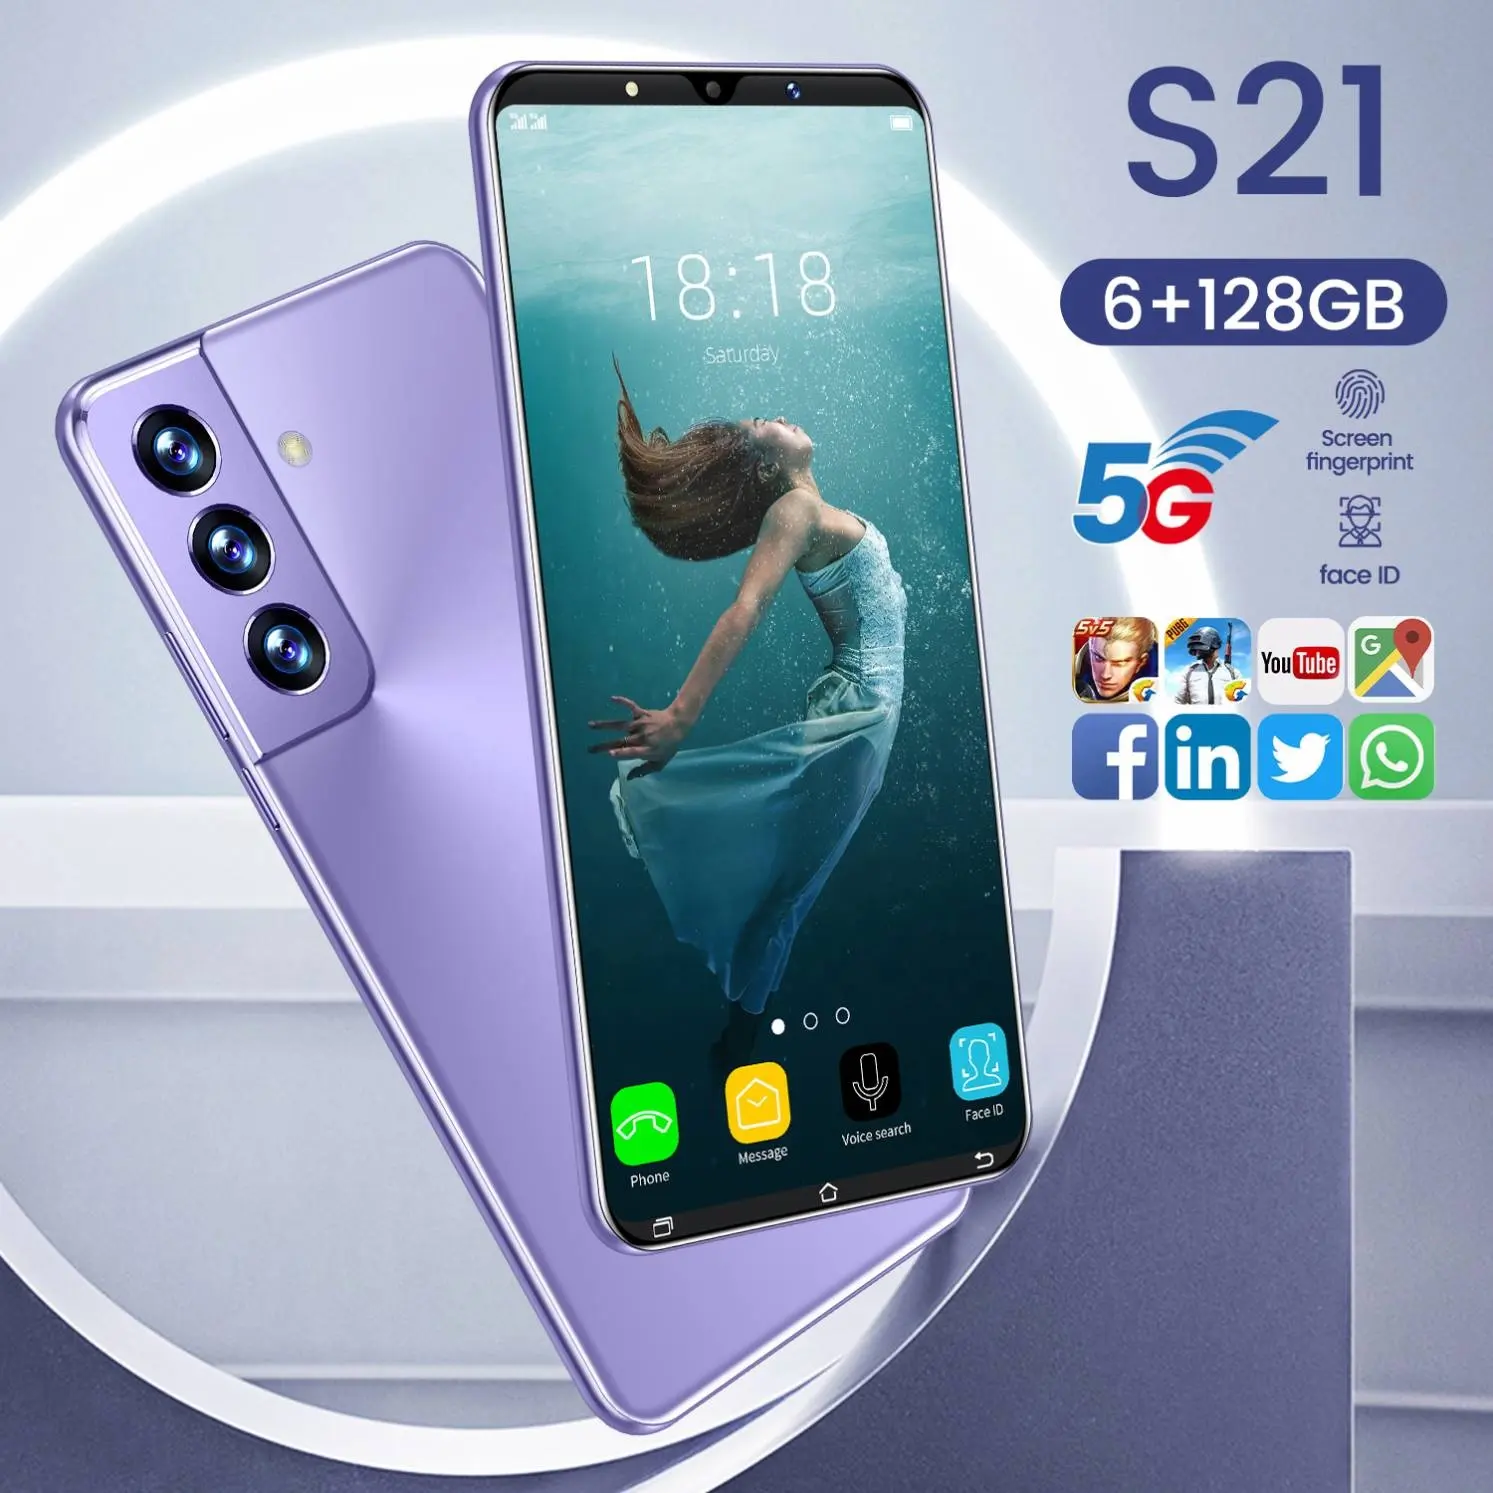 Brand New Low Price Mobile Phones S21 5.3-inch Small Screen Smart Phone 16+512GB Large Memory Android unlocked Smartphone